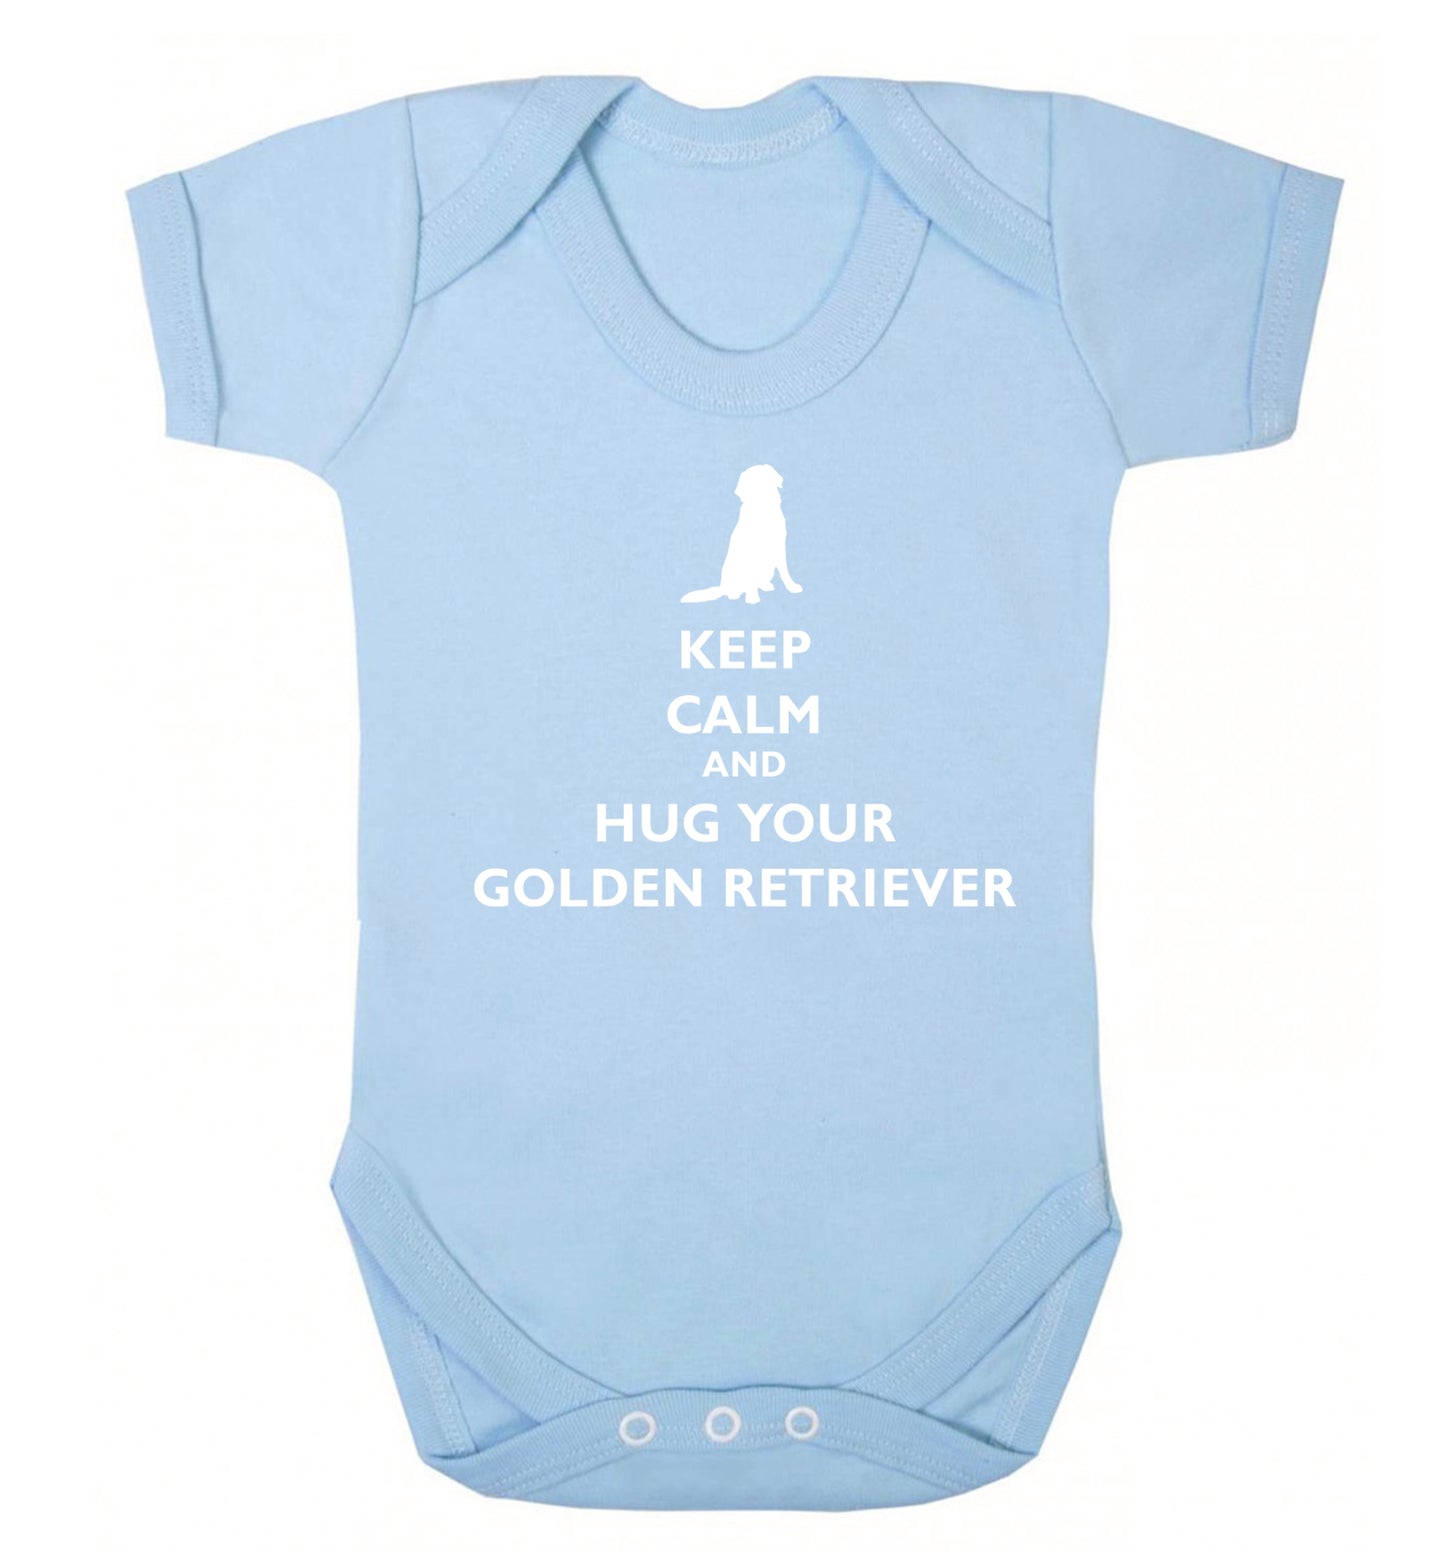 Keep calm and hug your golden retriever Baby Vest pale blue 18-24 months